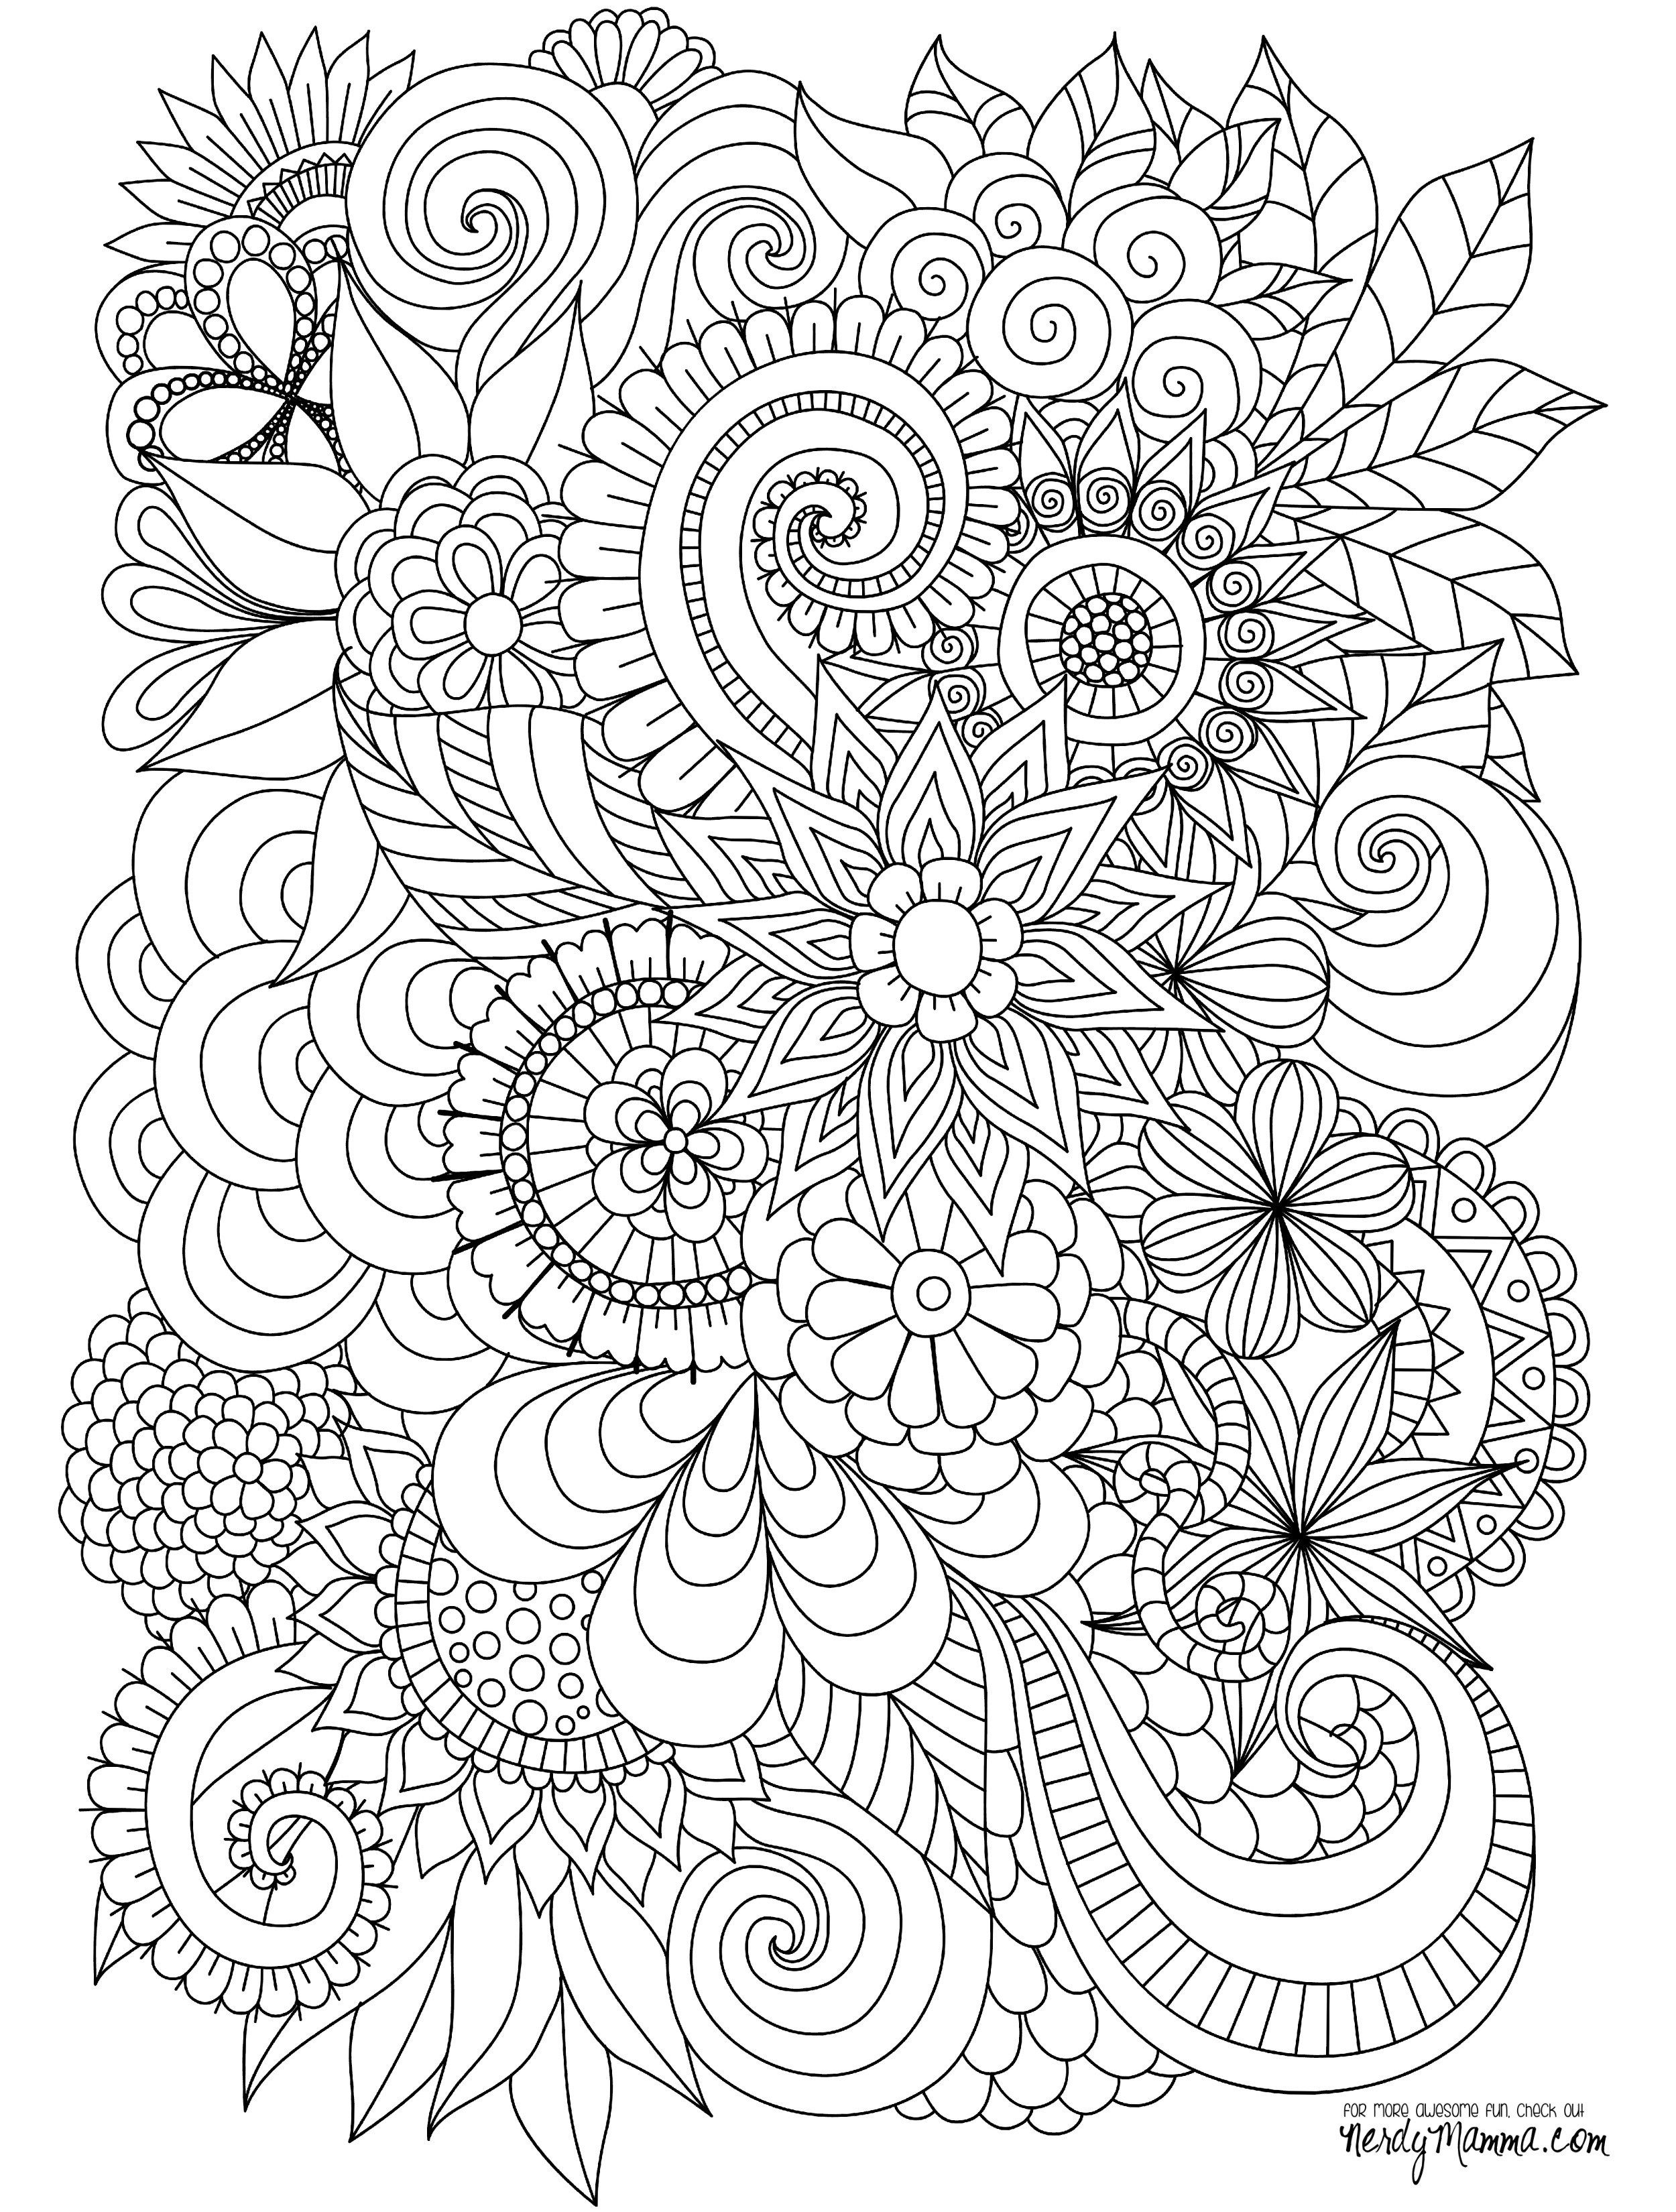 Flowers Abstract Coloring Pages Colouring Adult Detailed Advanced - Free Printable Coloring Designs For Adults